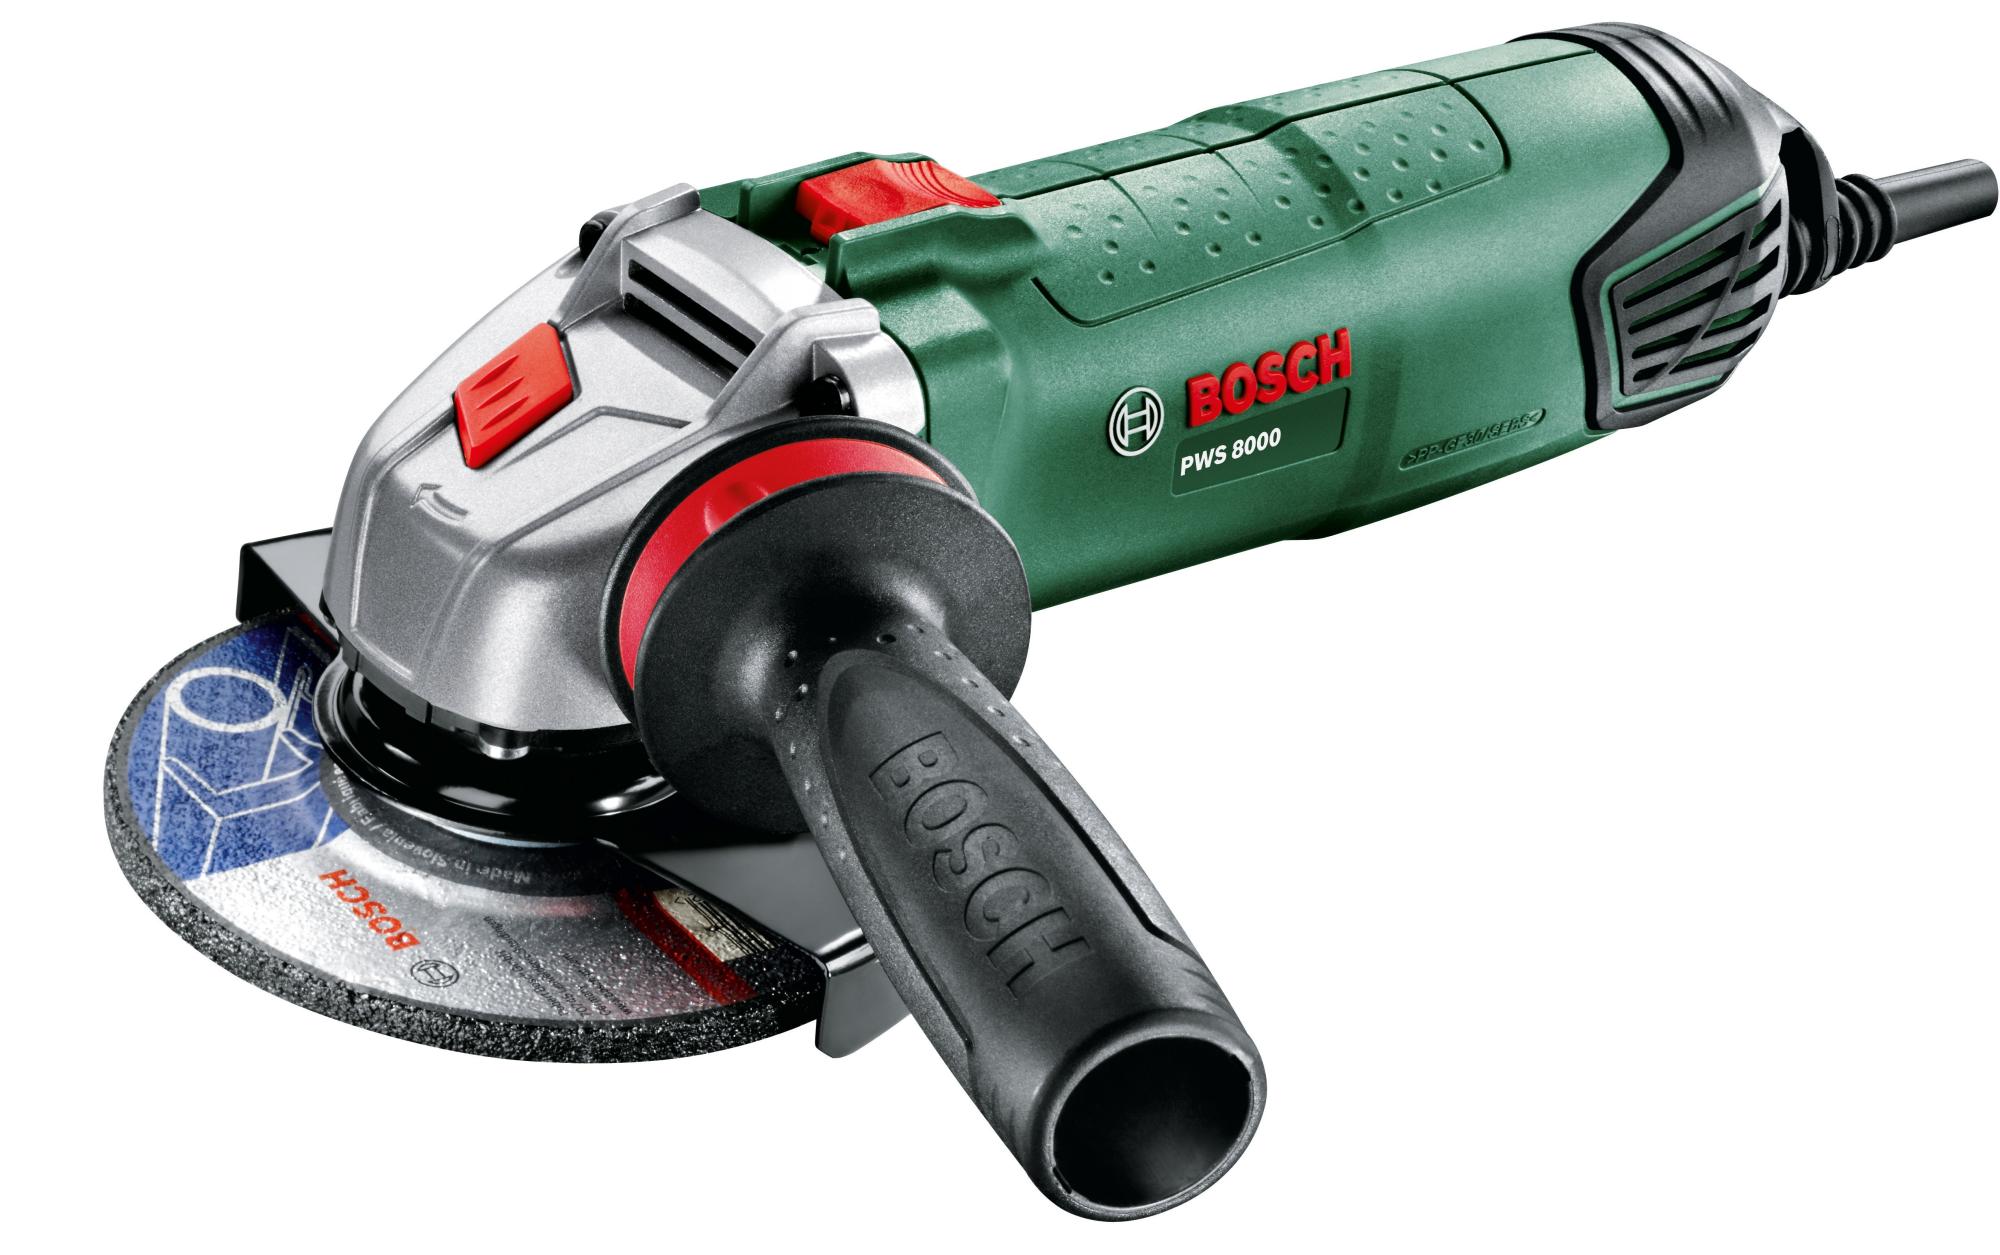 Meuleuse d'angle filaire BOSCH, Pws8000, 800 W